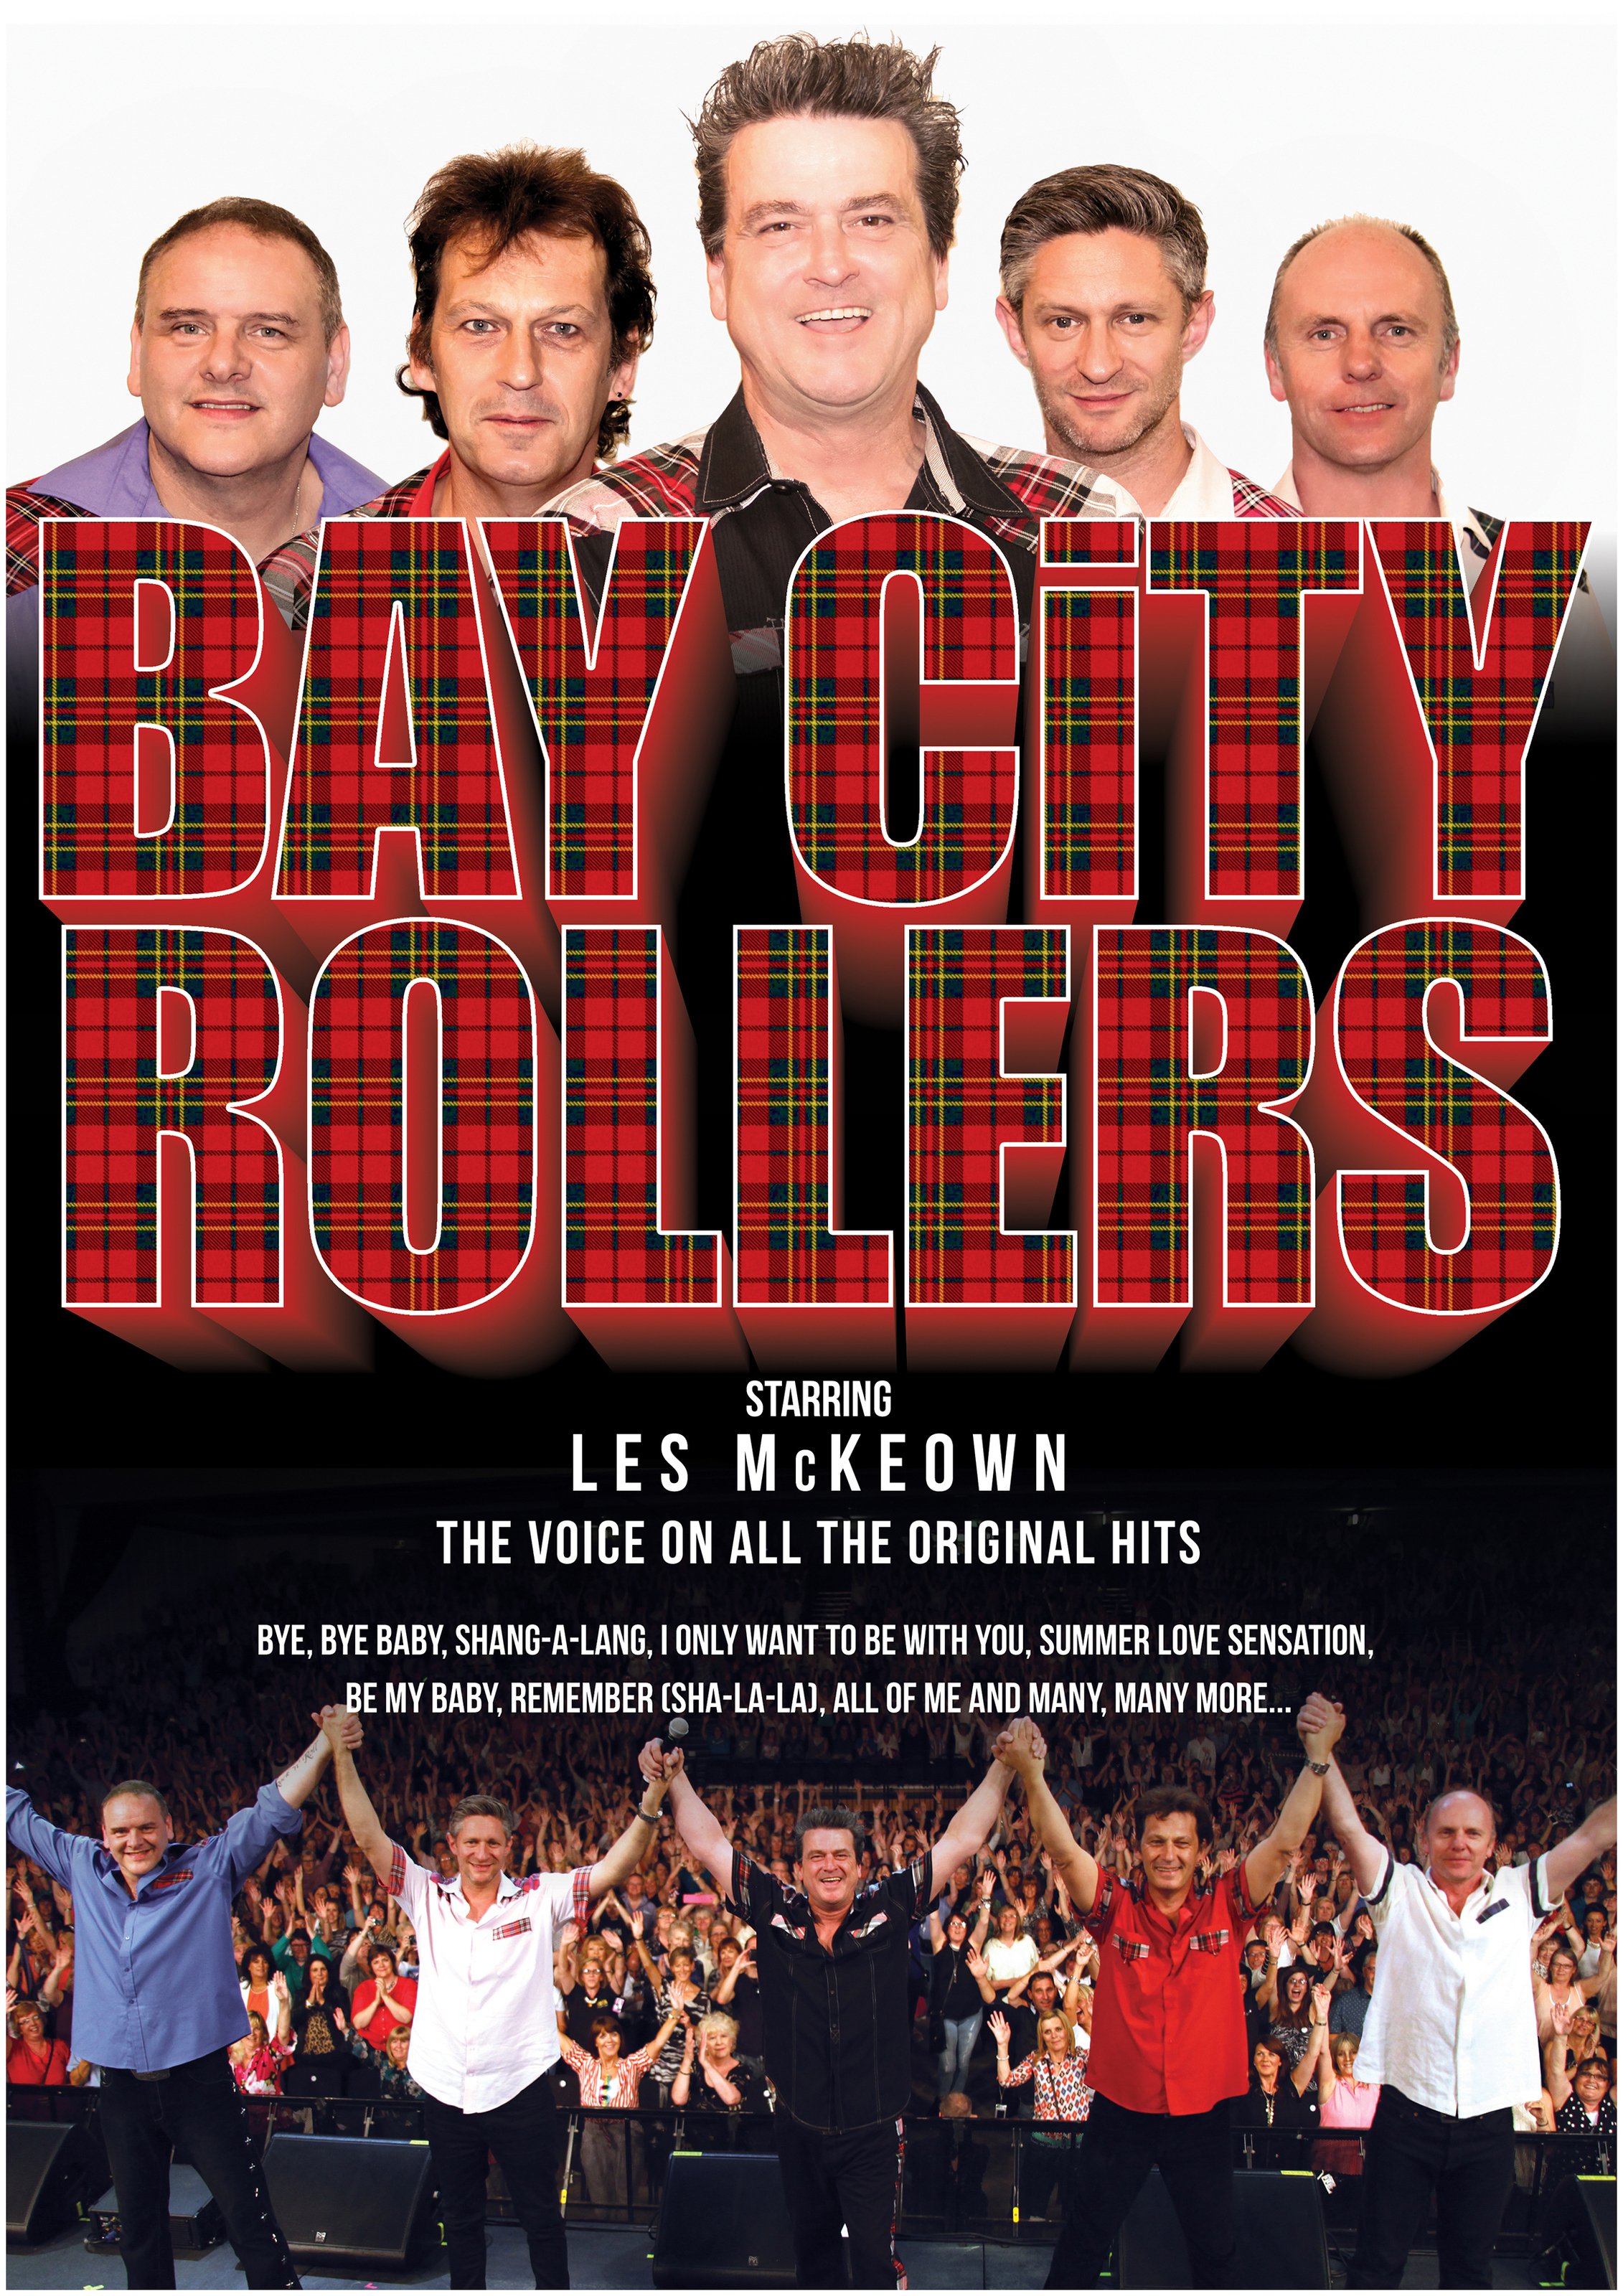 Bay City Rollers starring Les McKeown | ReverbNation